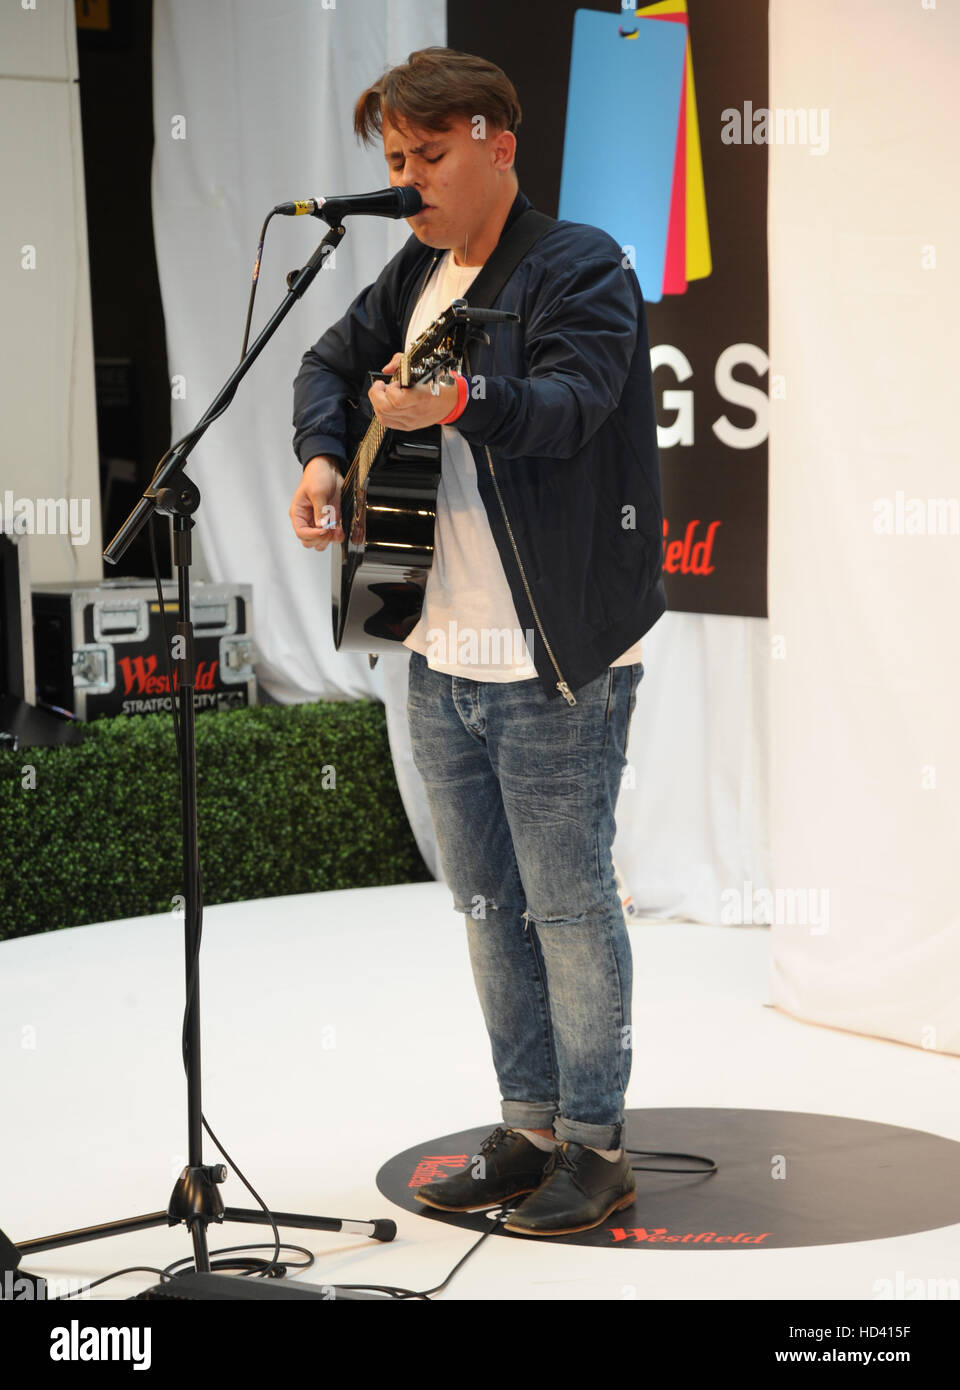 Westfield Stratford Concerts grand final comprend : Lewis Smith Où : London, Royaume-Uni Quand : 04 Oct 2016 Banque D'Images